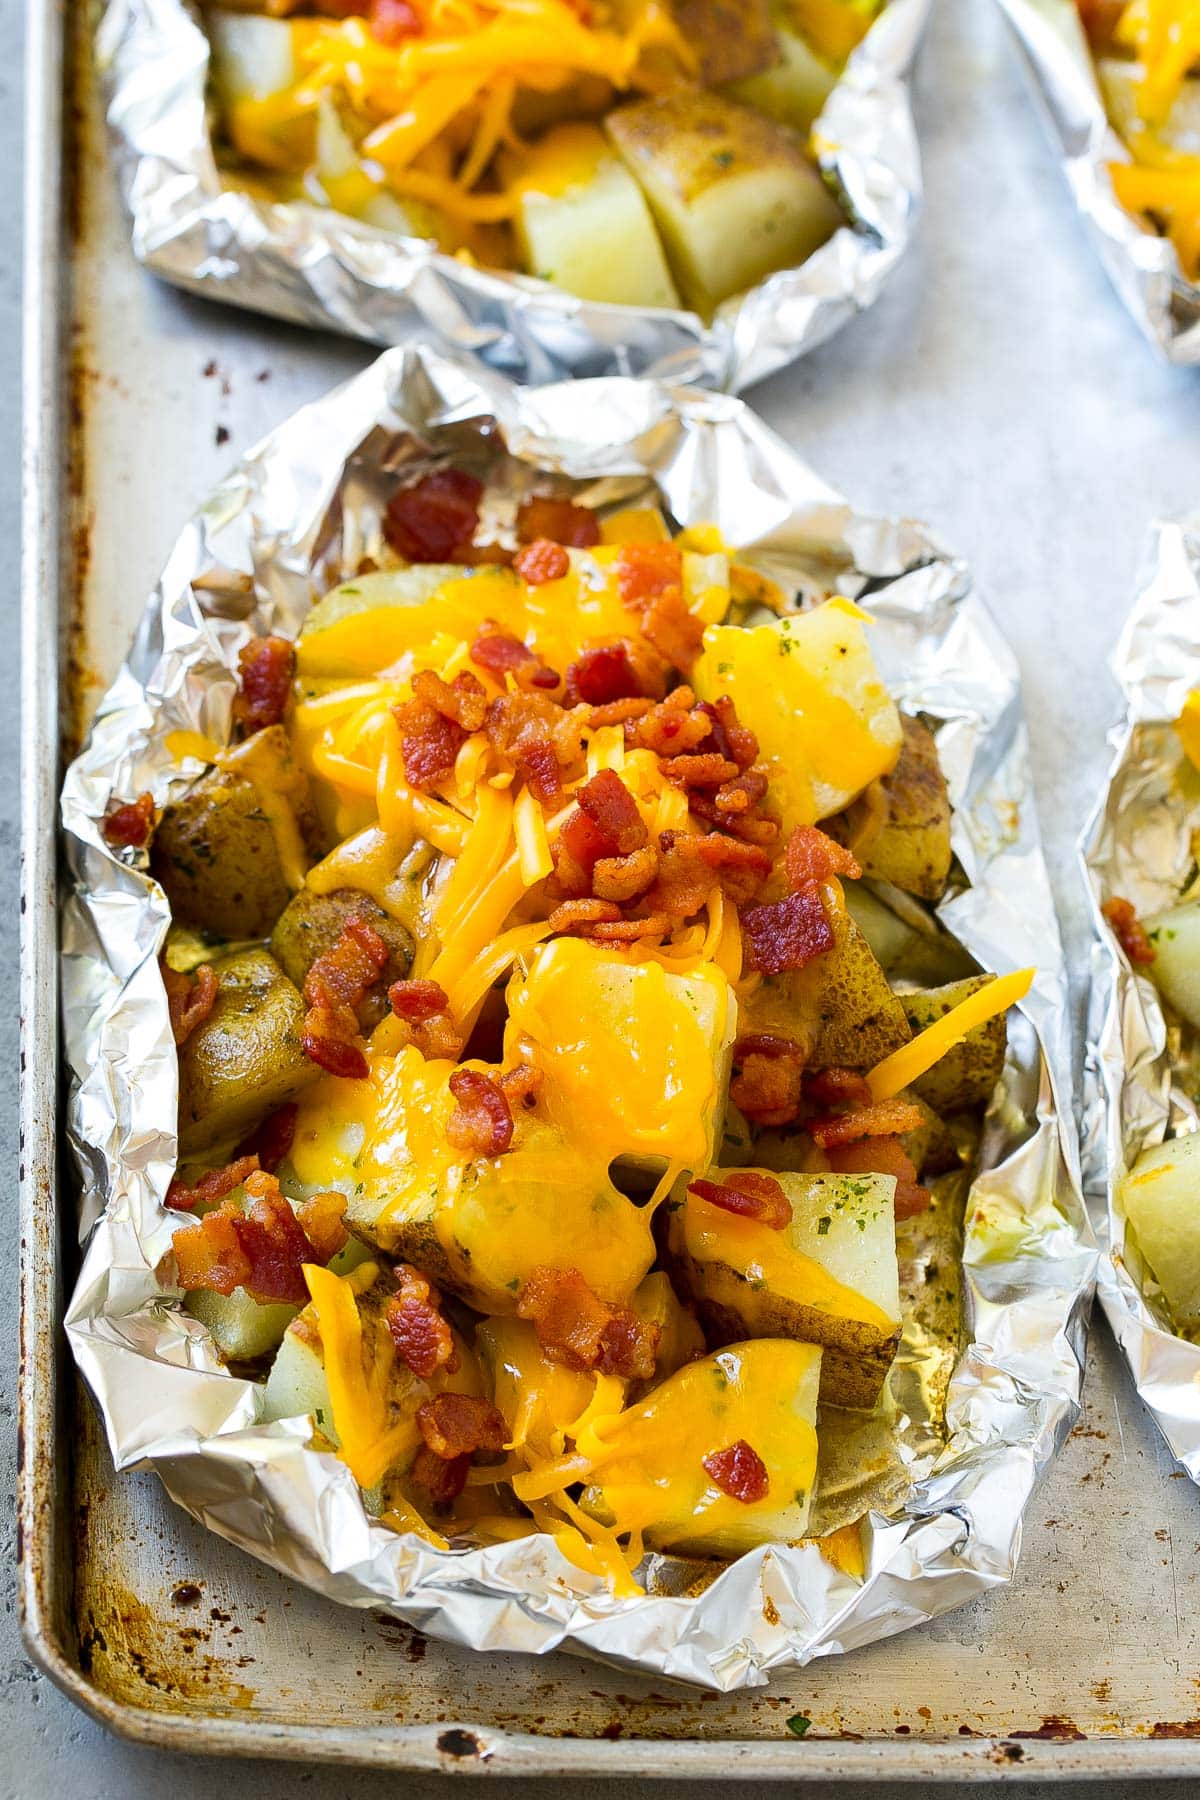 Cooked potatoes with shredded cheese and bacon on top.